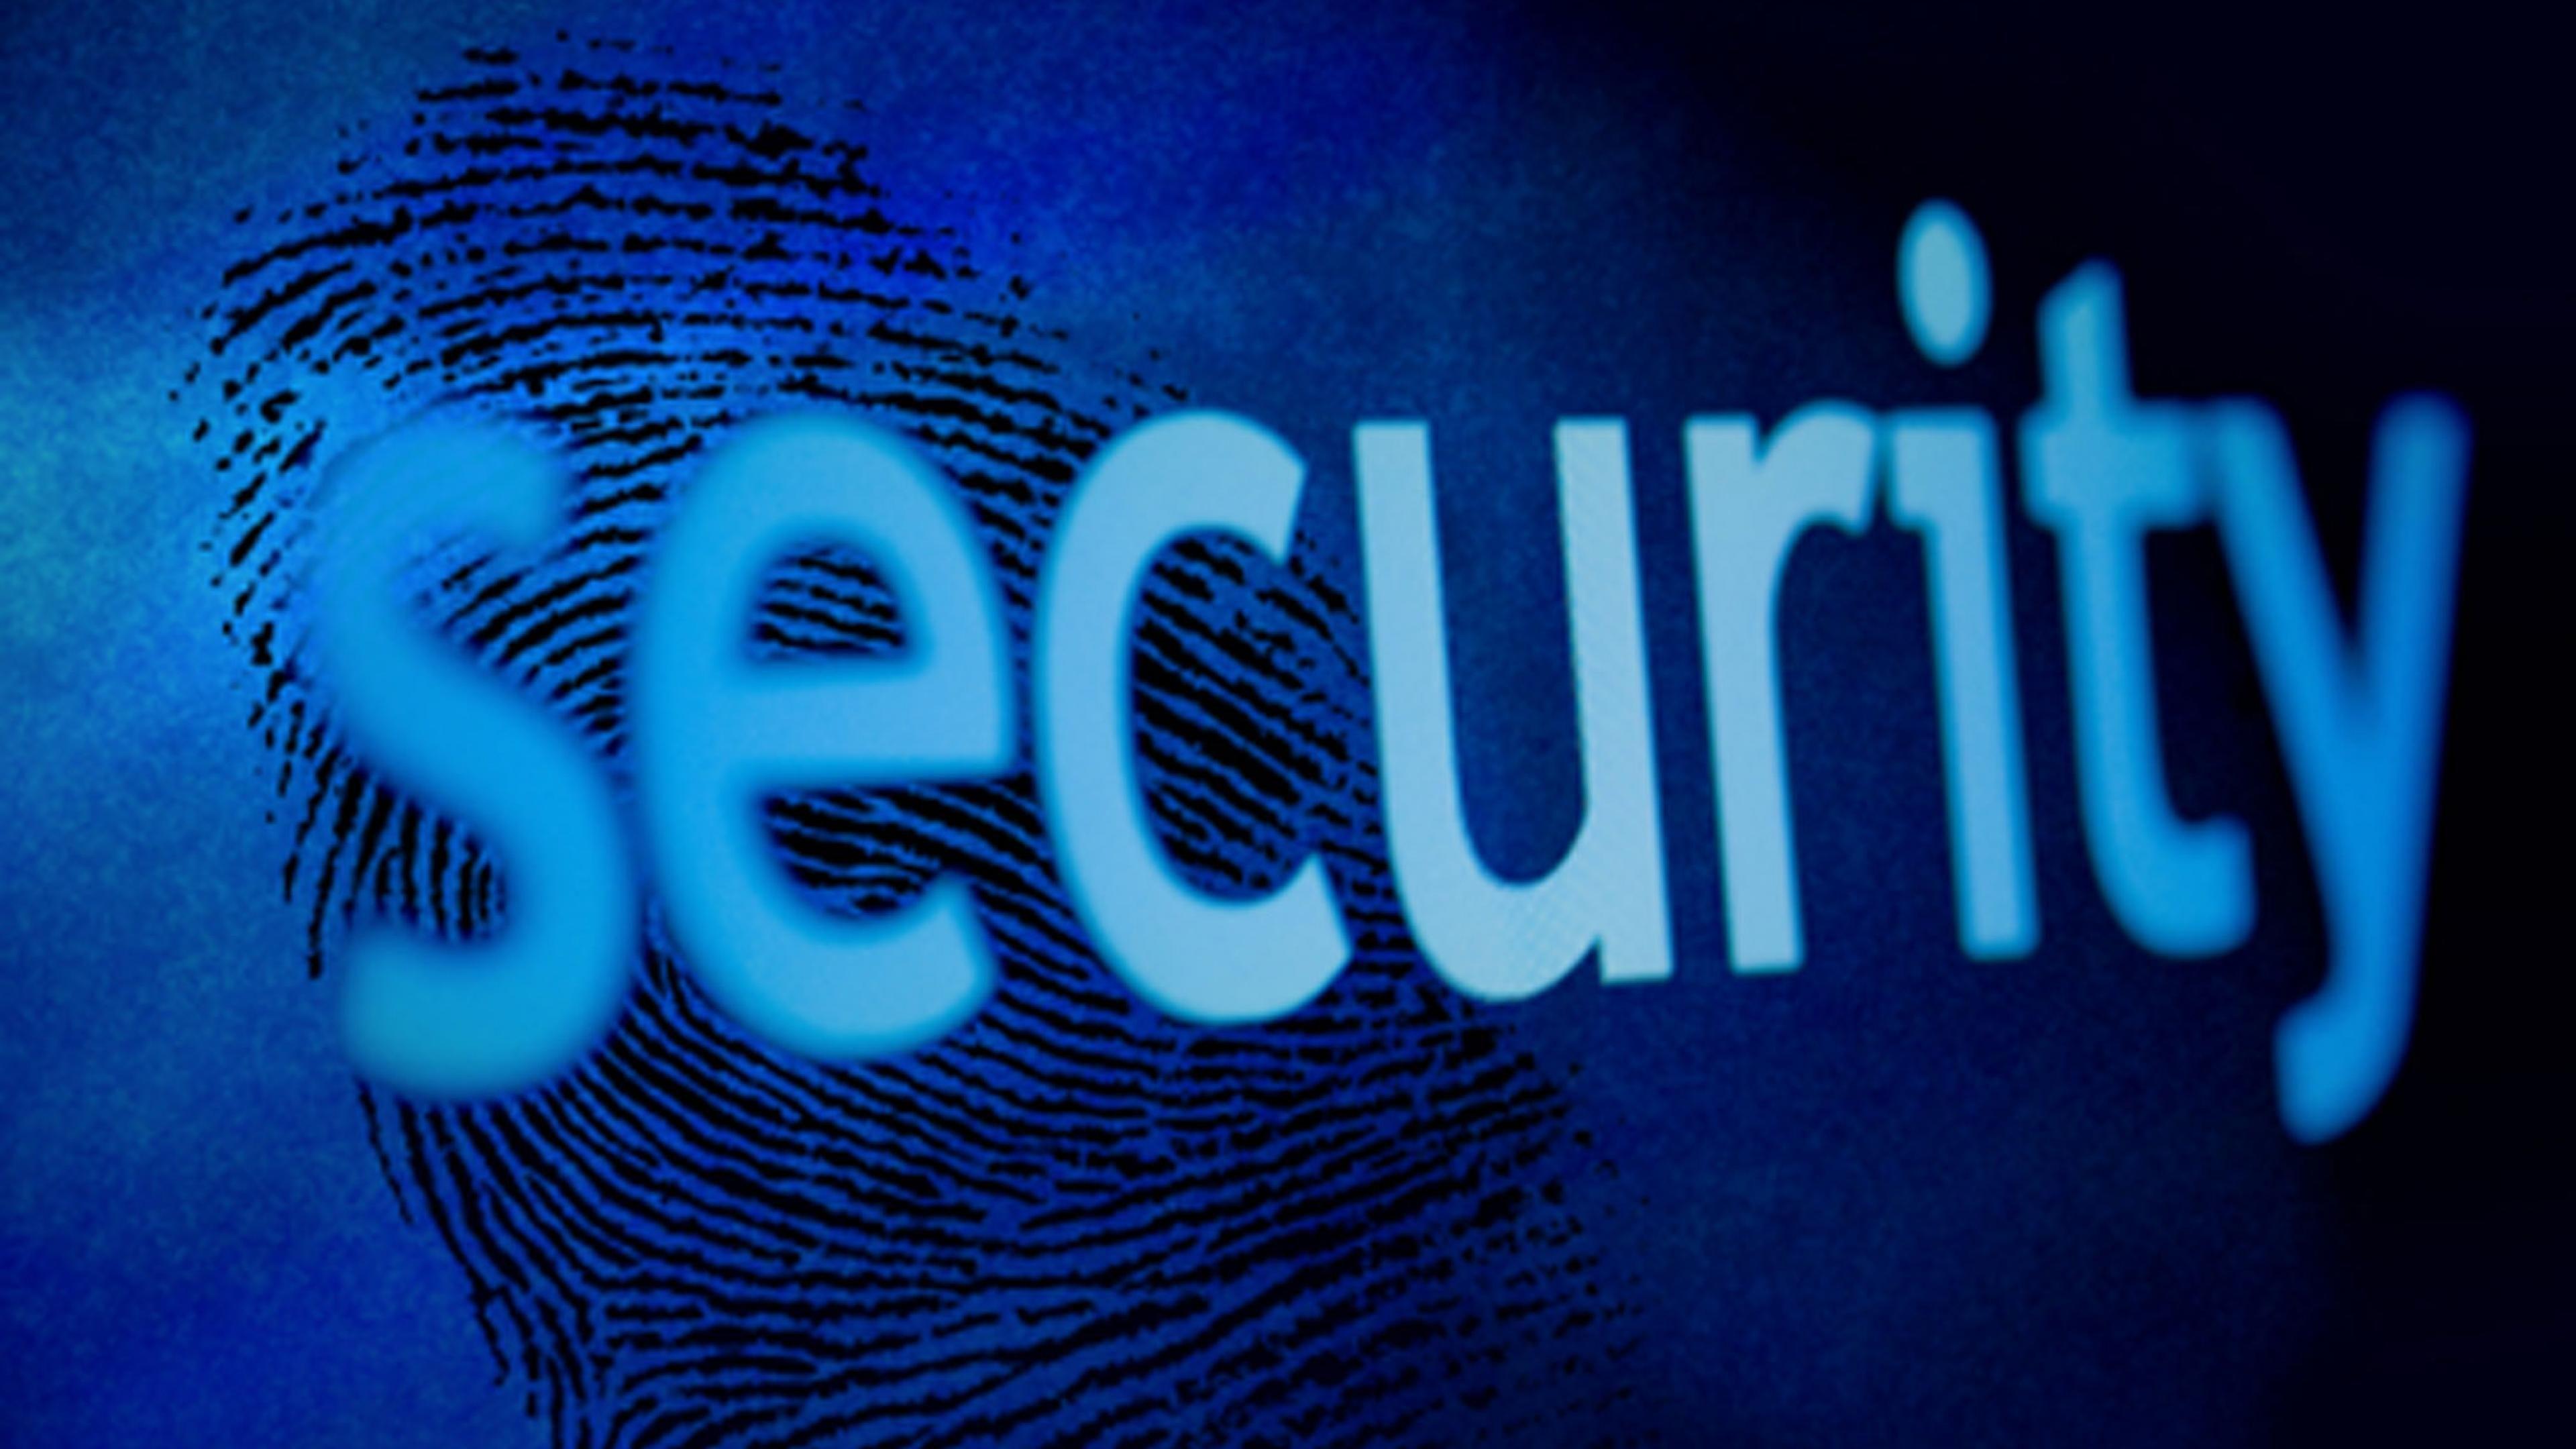 Security Wallpaper, 46 Best HD Image of Security, High Quality